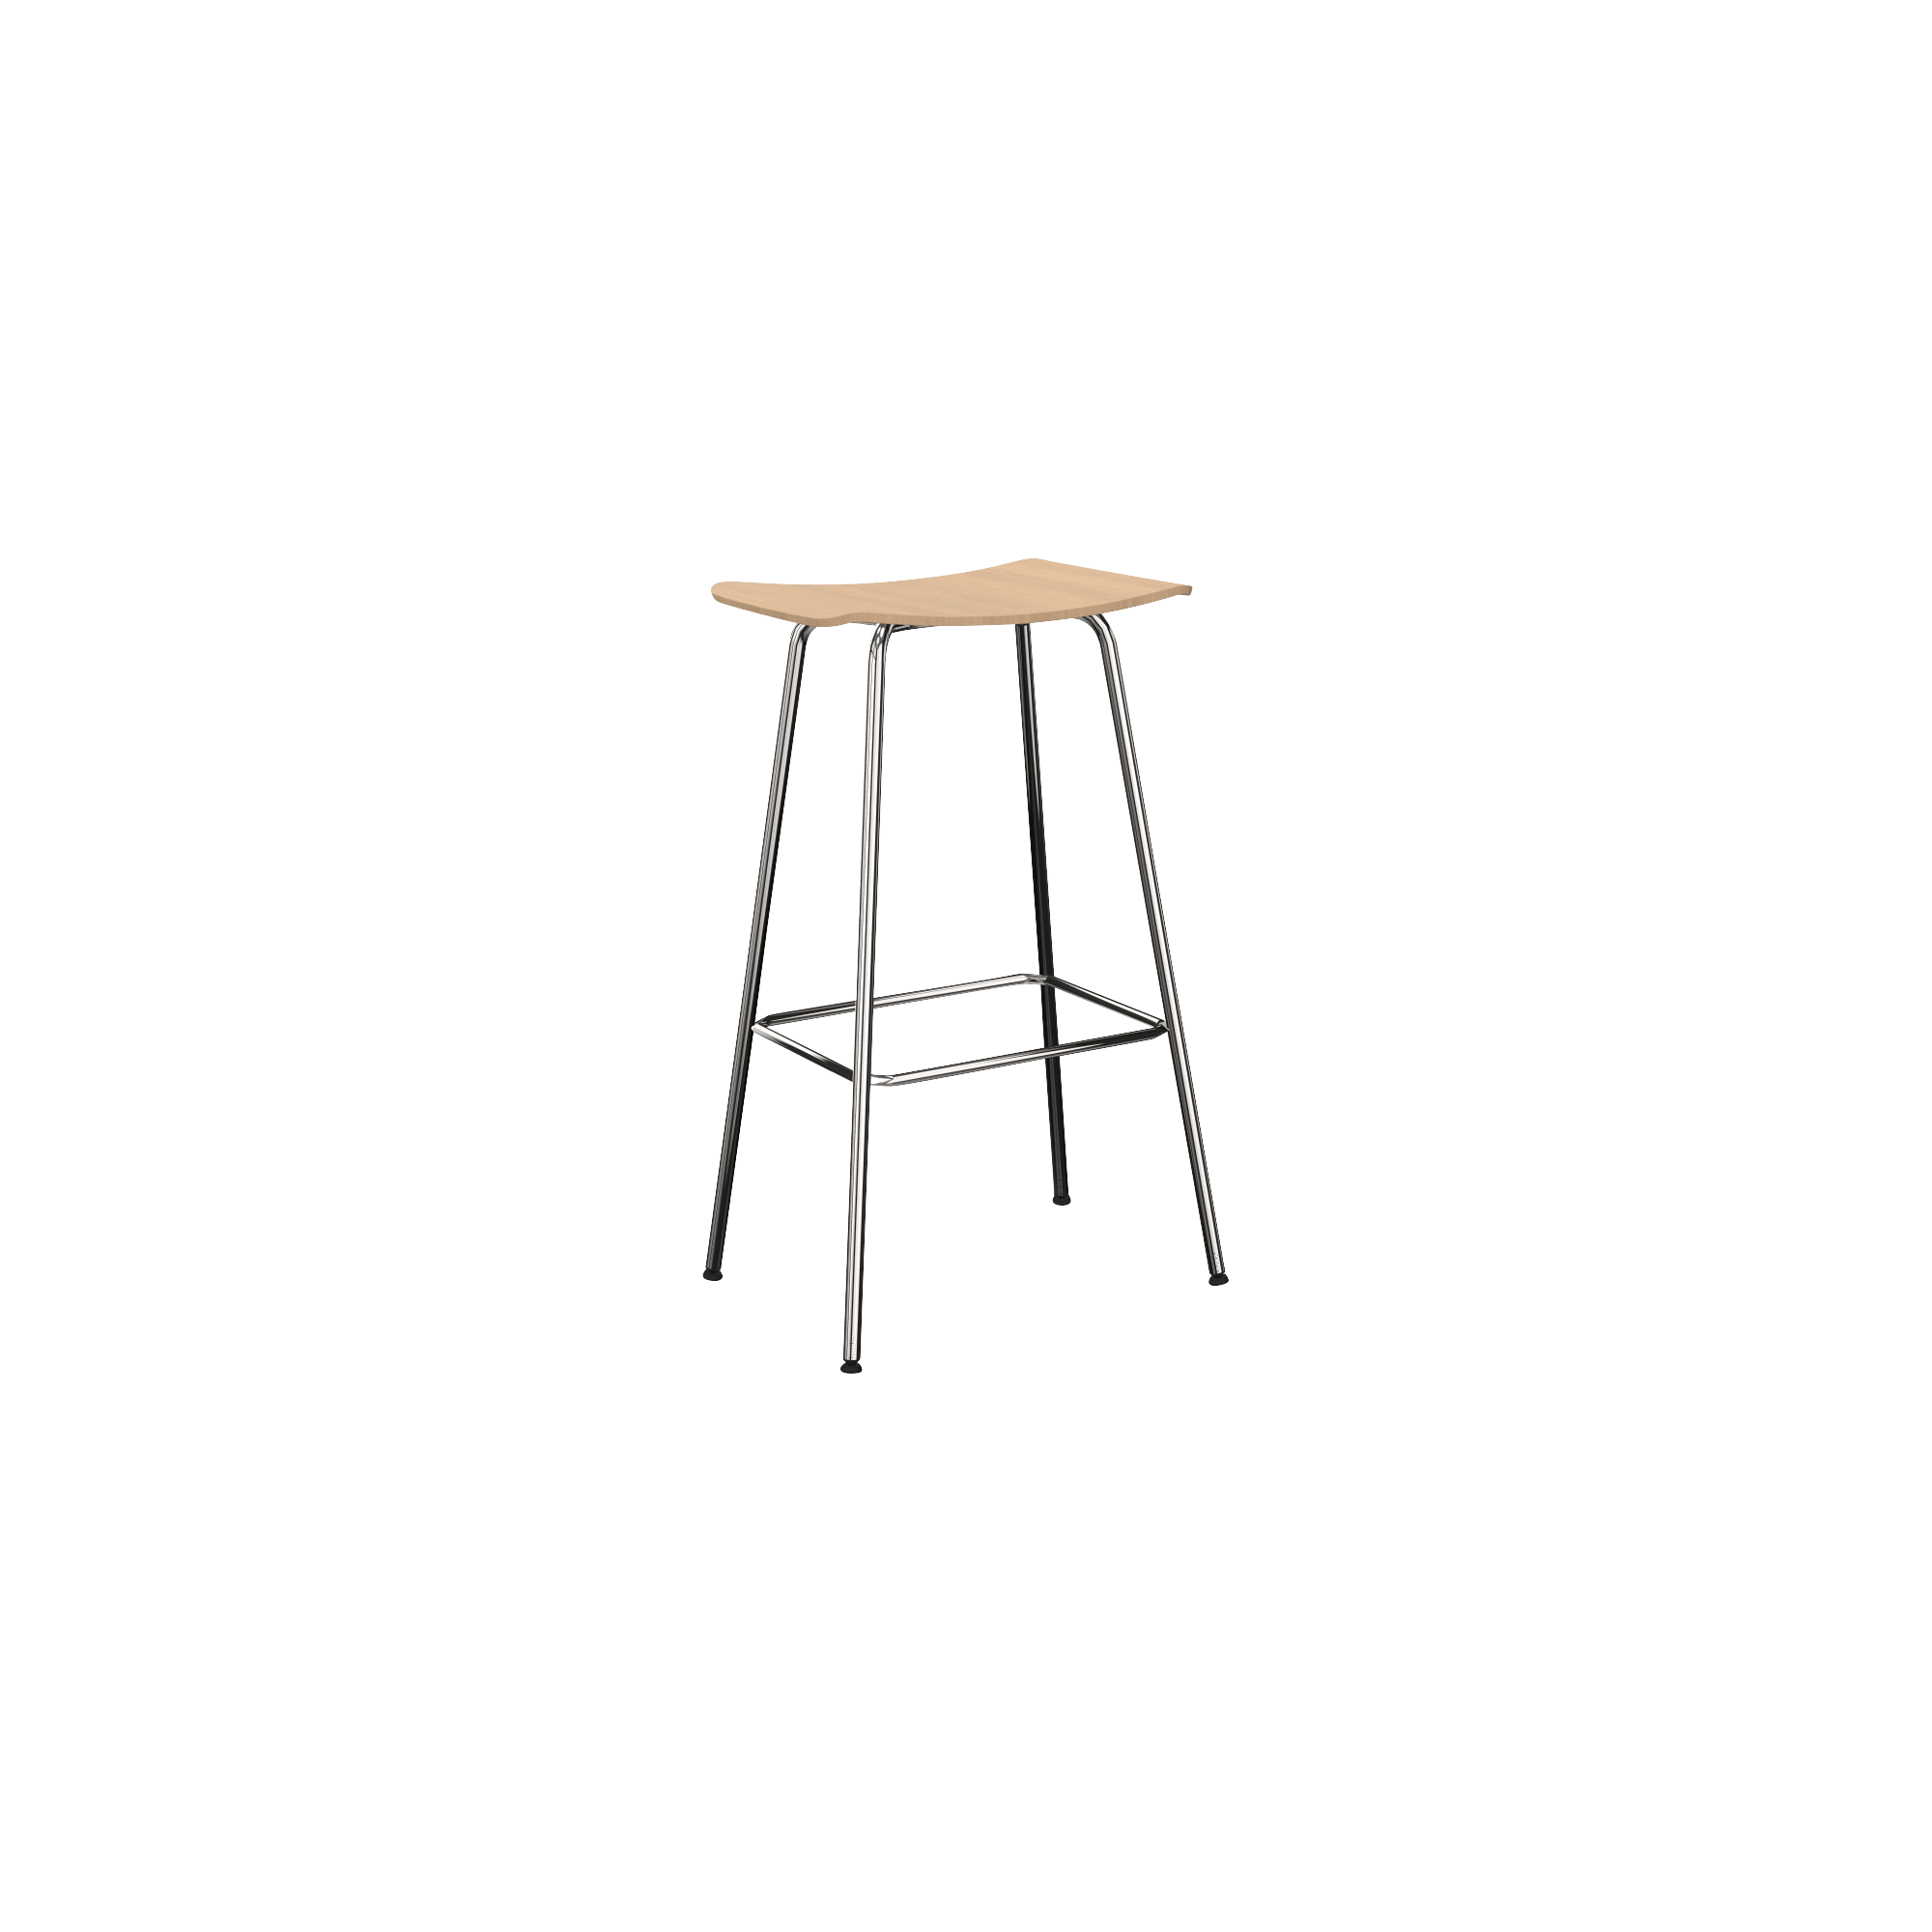 counter height stool with wooden seat and metal legs